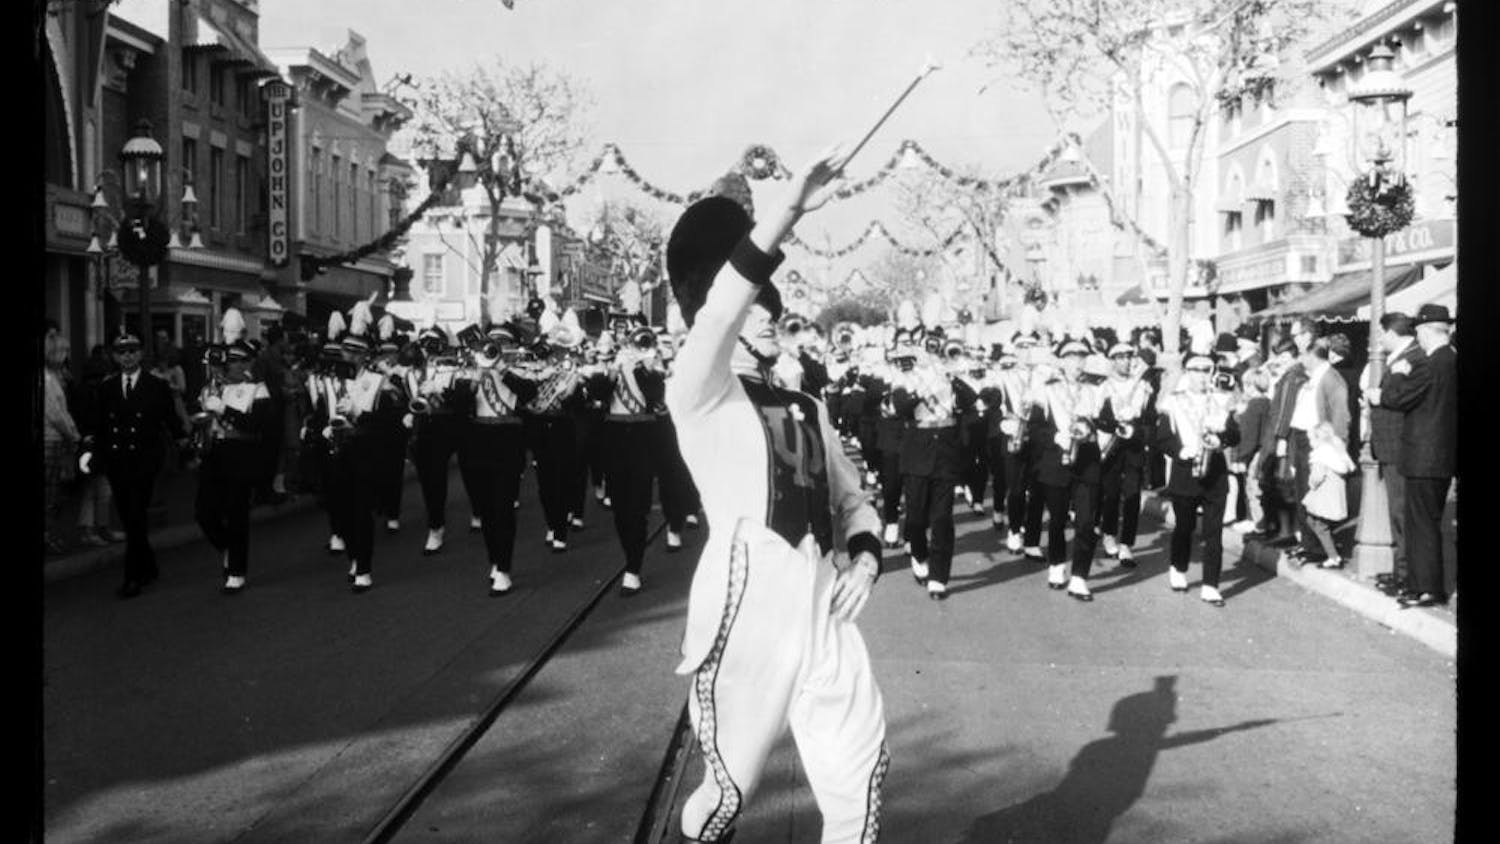 1967: The Marching Hundred performs at Disneyland in 1967.